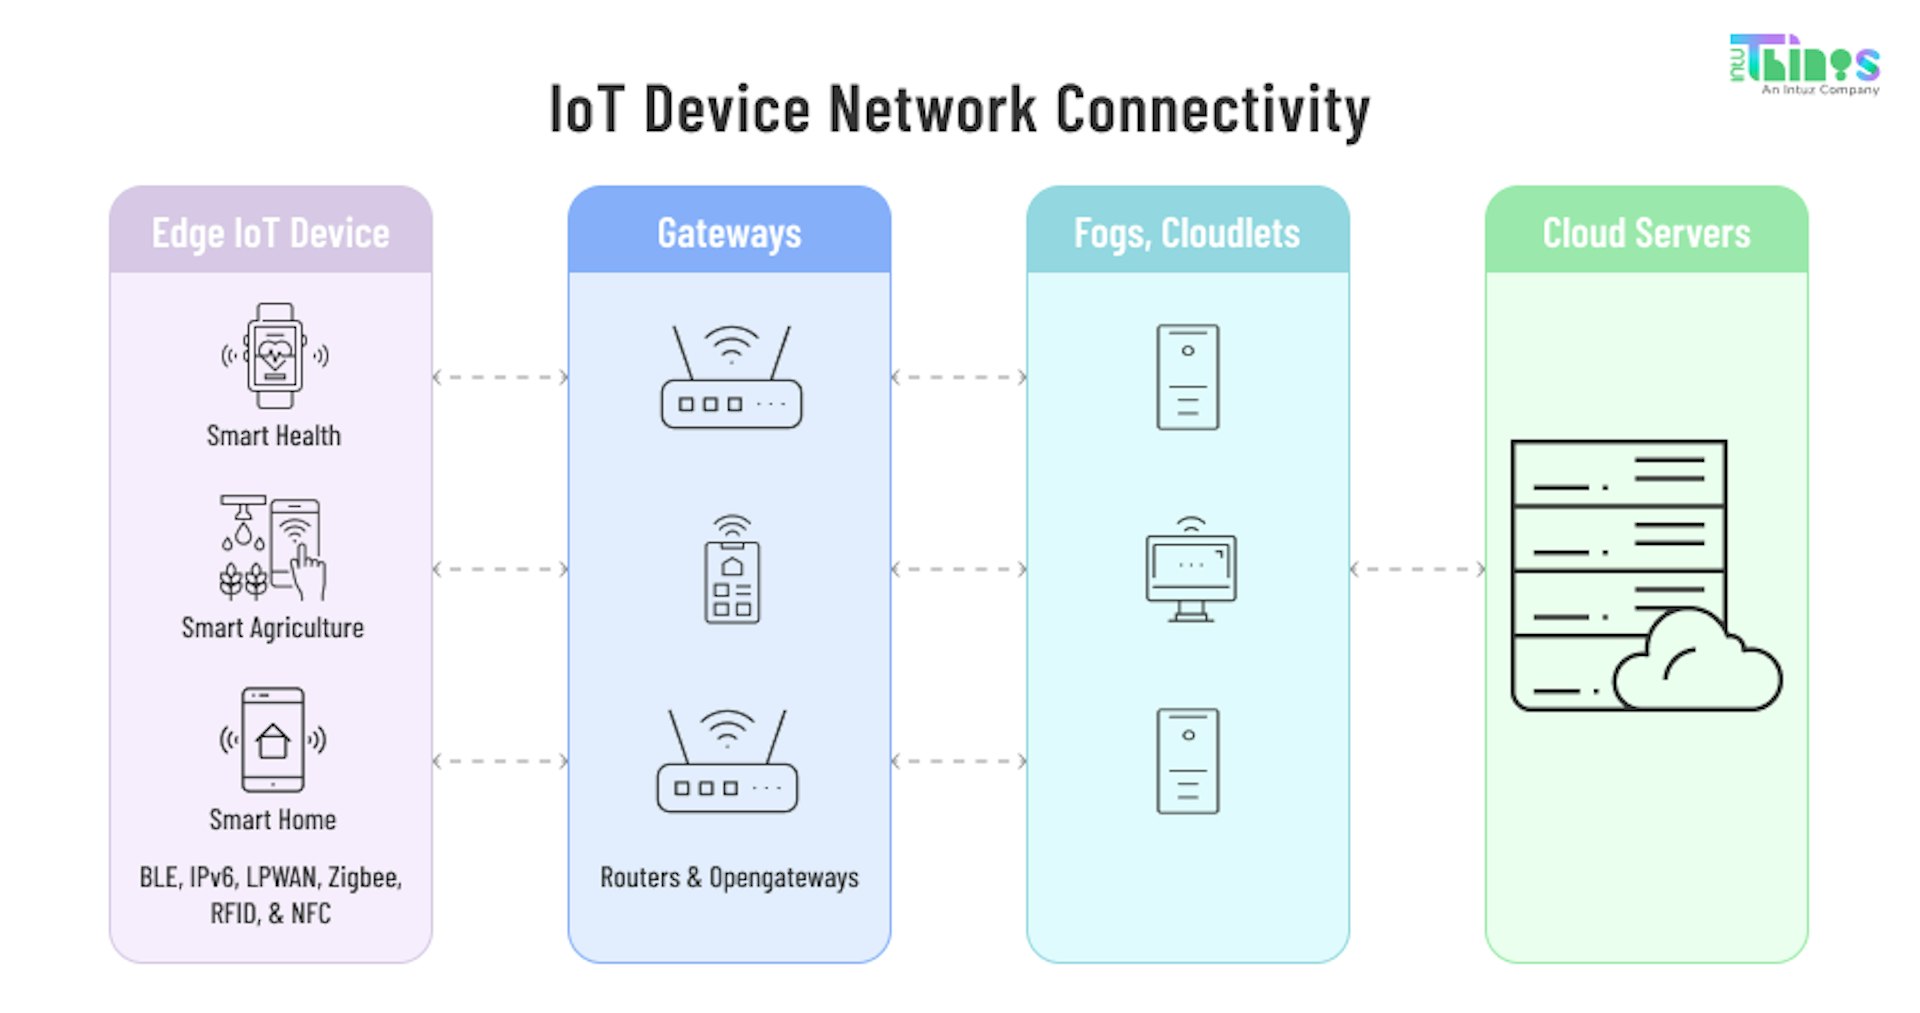 IoT device network connectivity